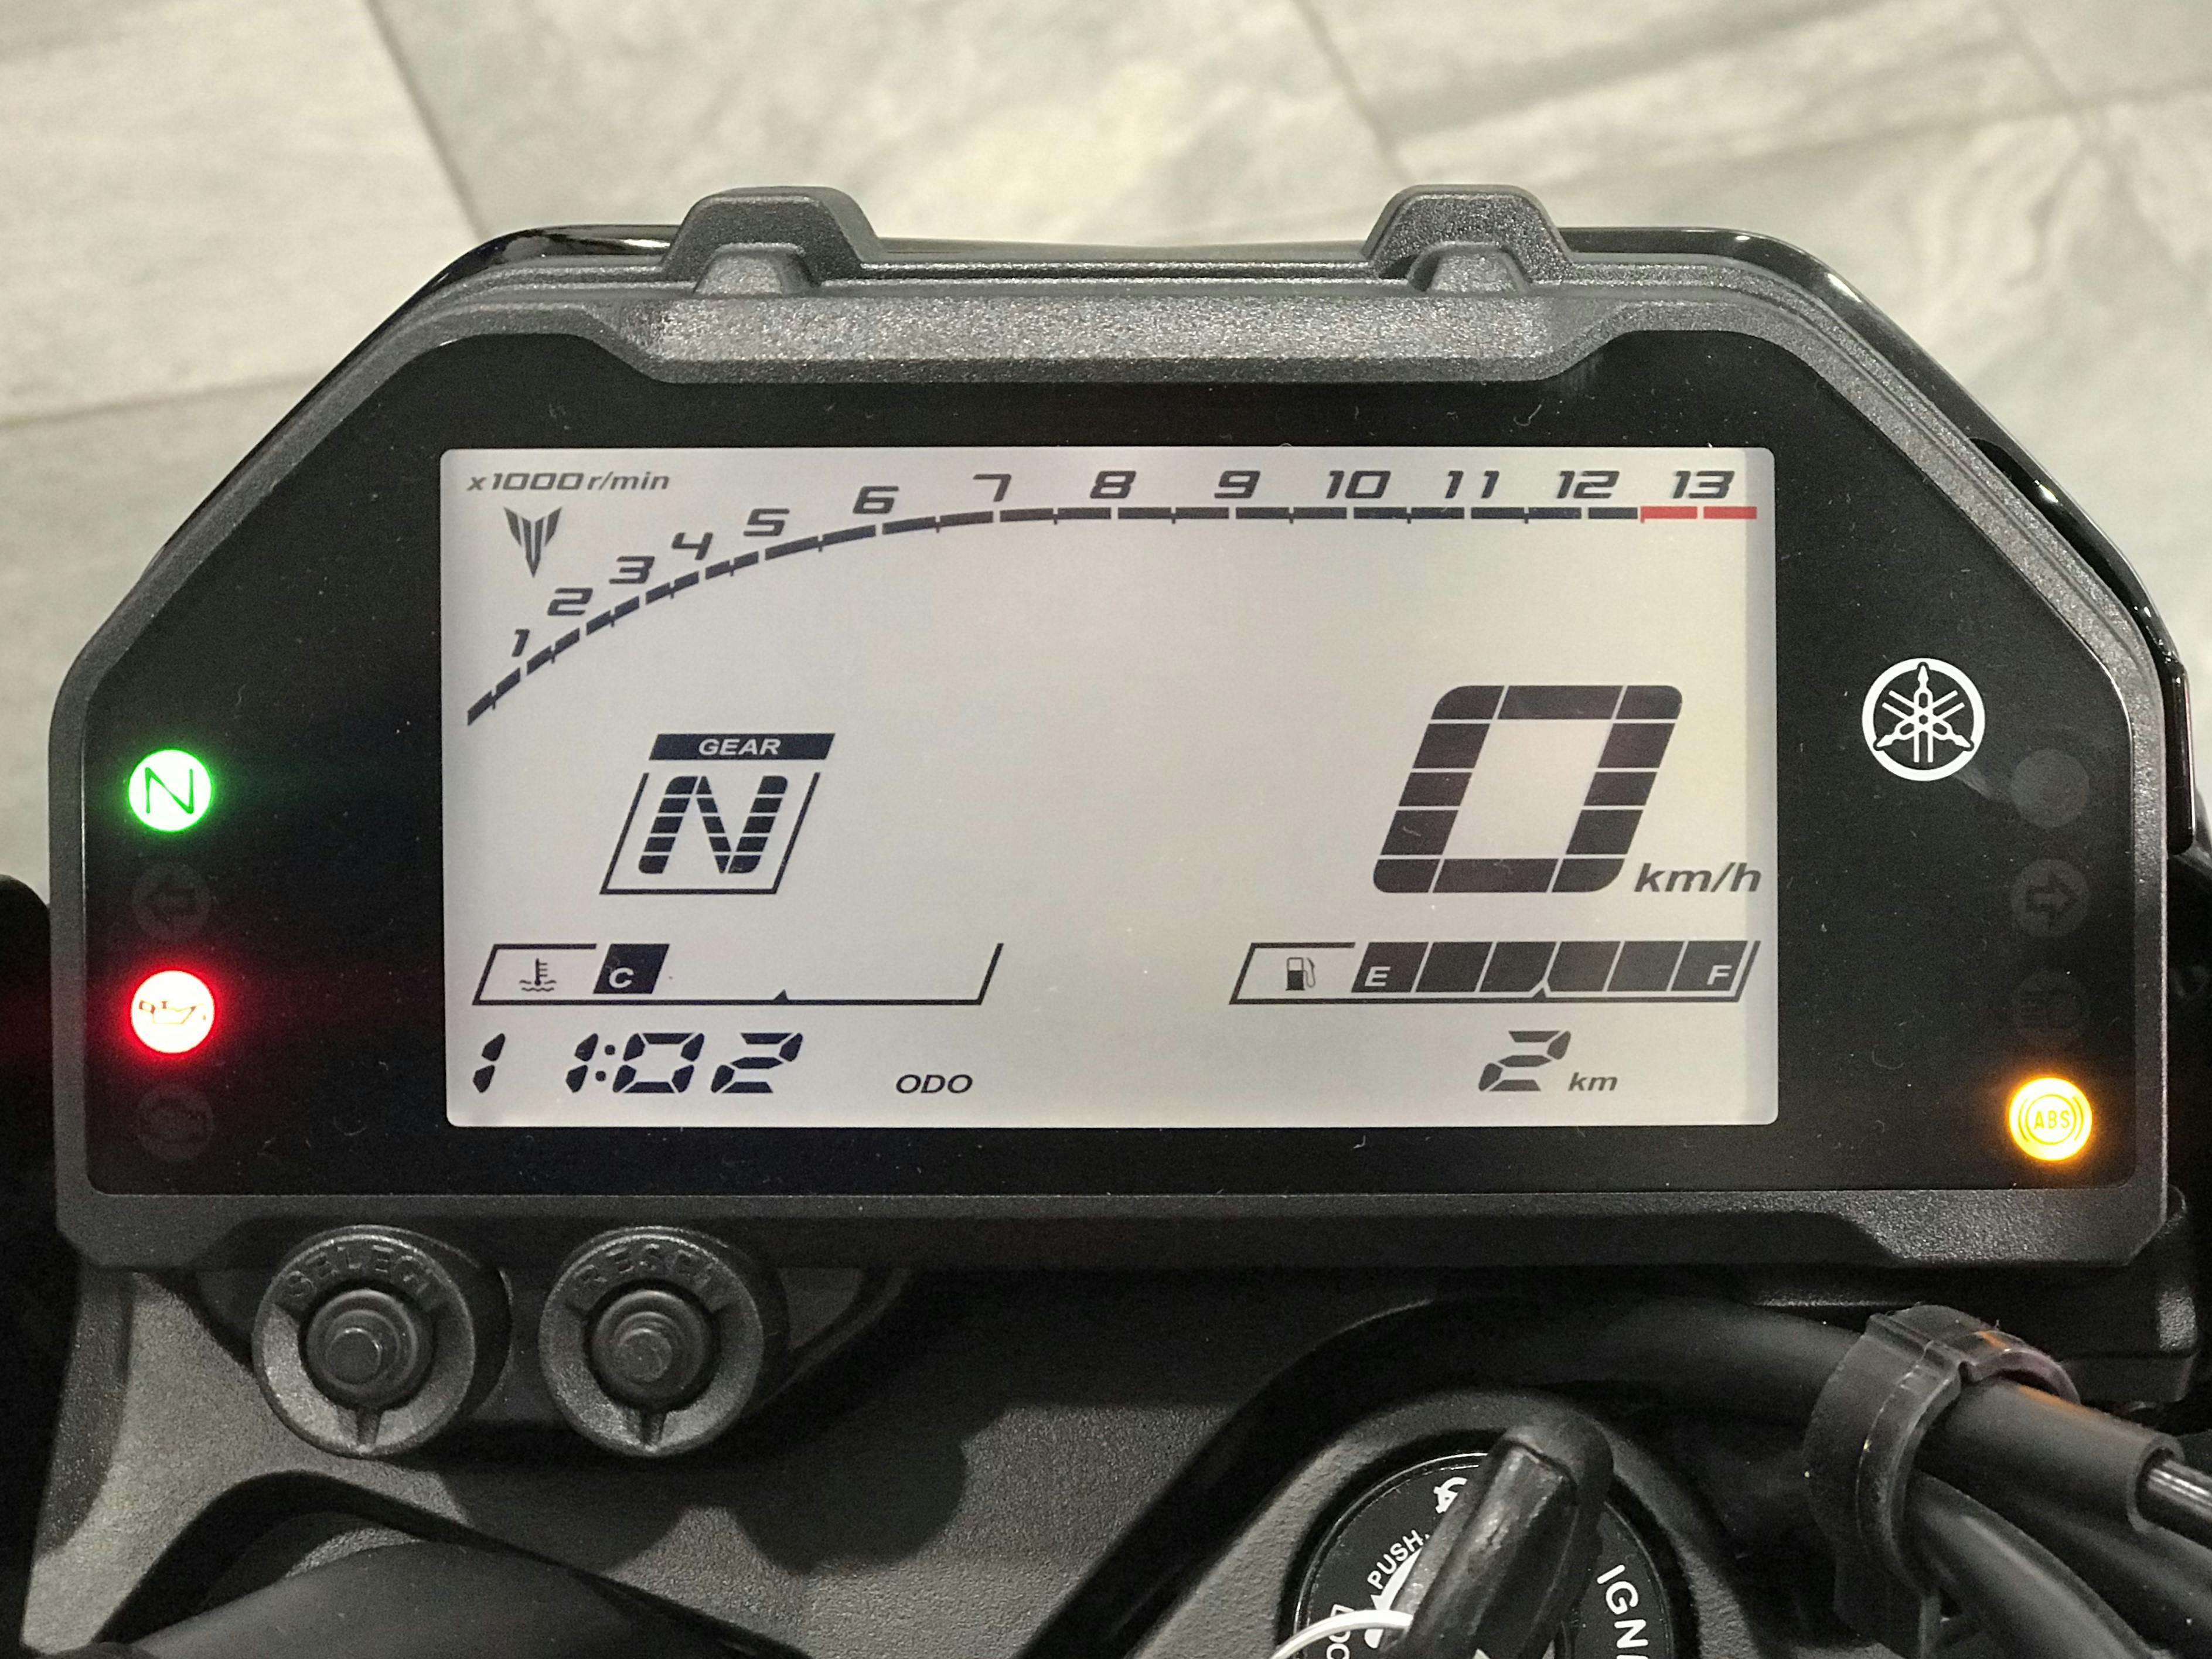 A close up of the dash of the Yamaha MT03